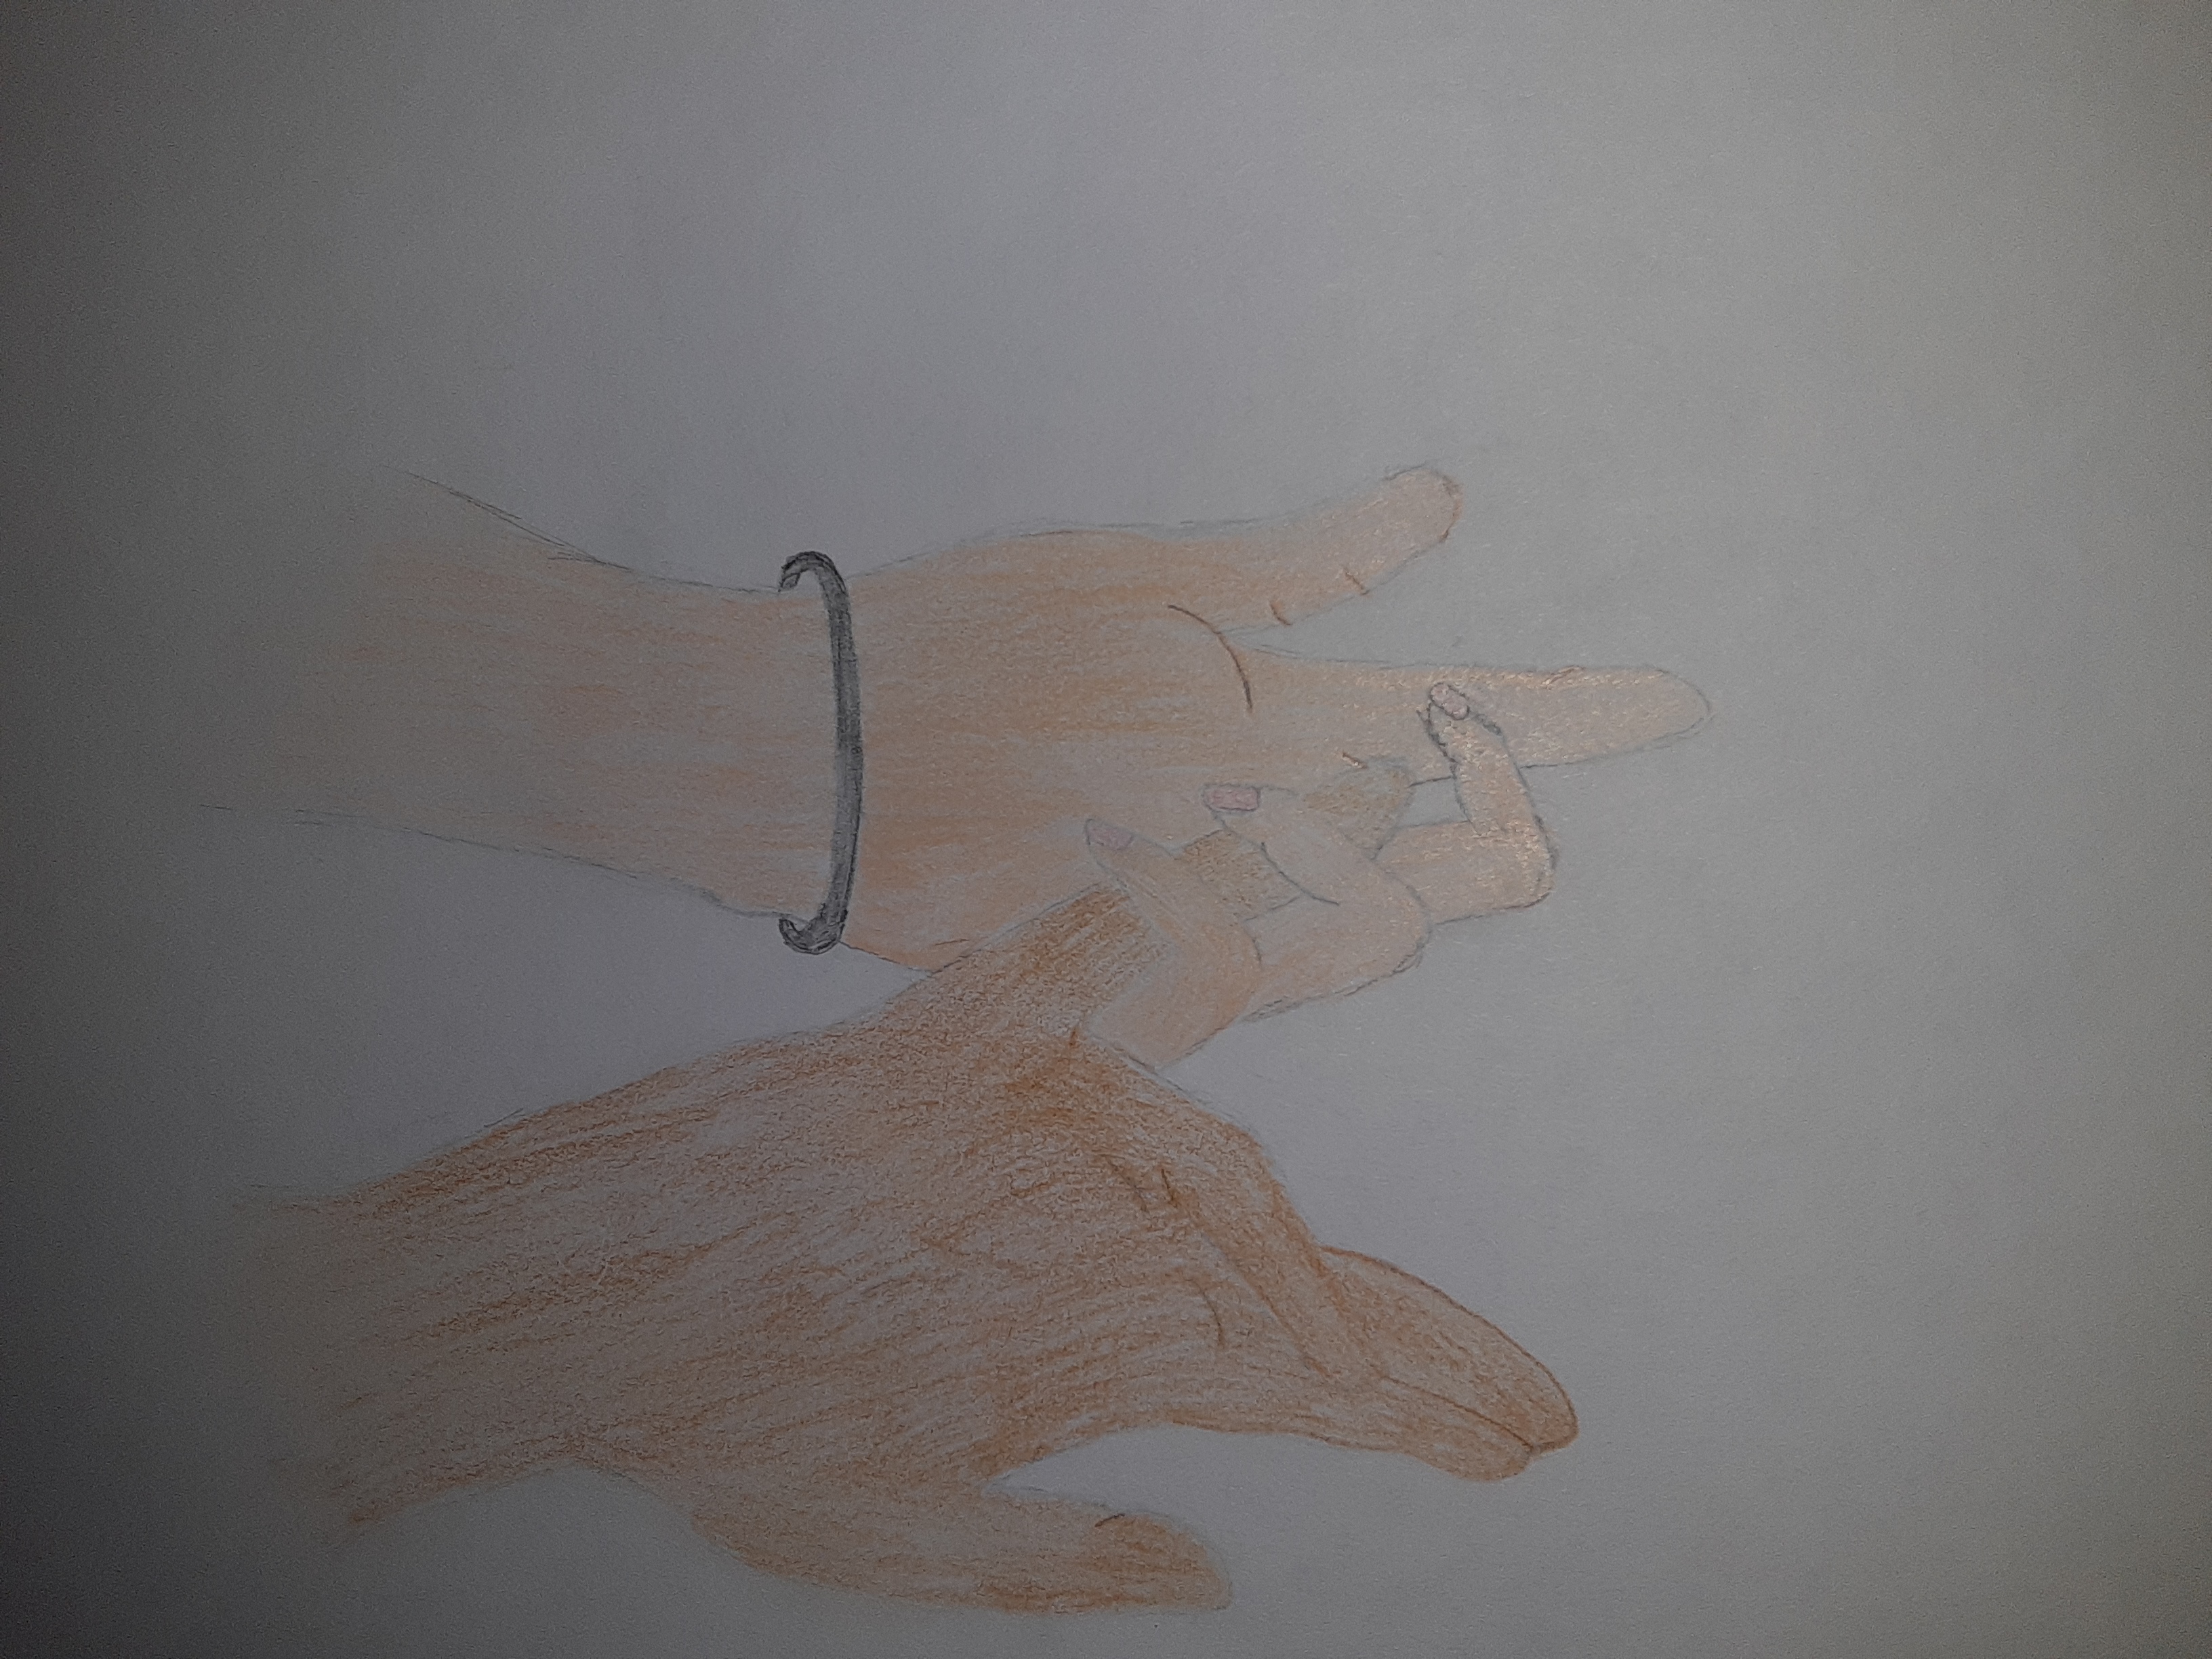 This is a easy colorful sketch of holding hands.